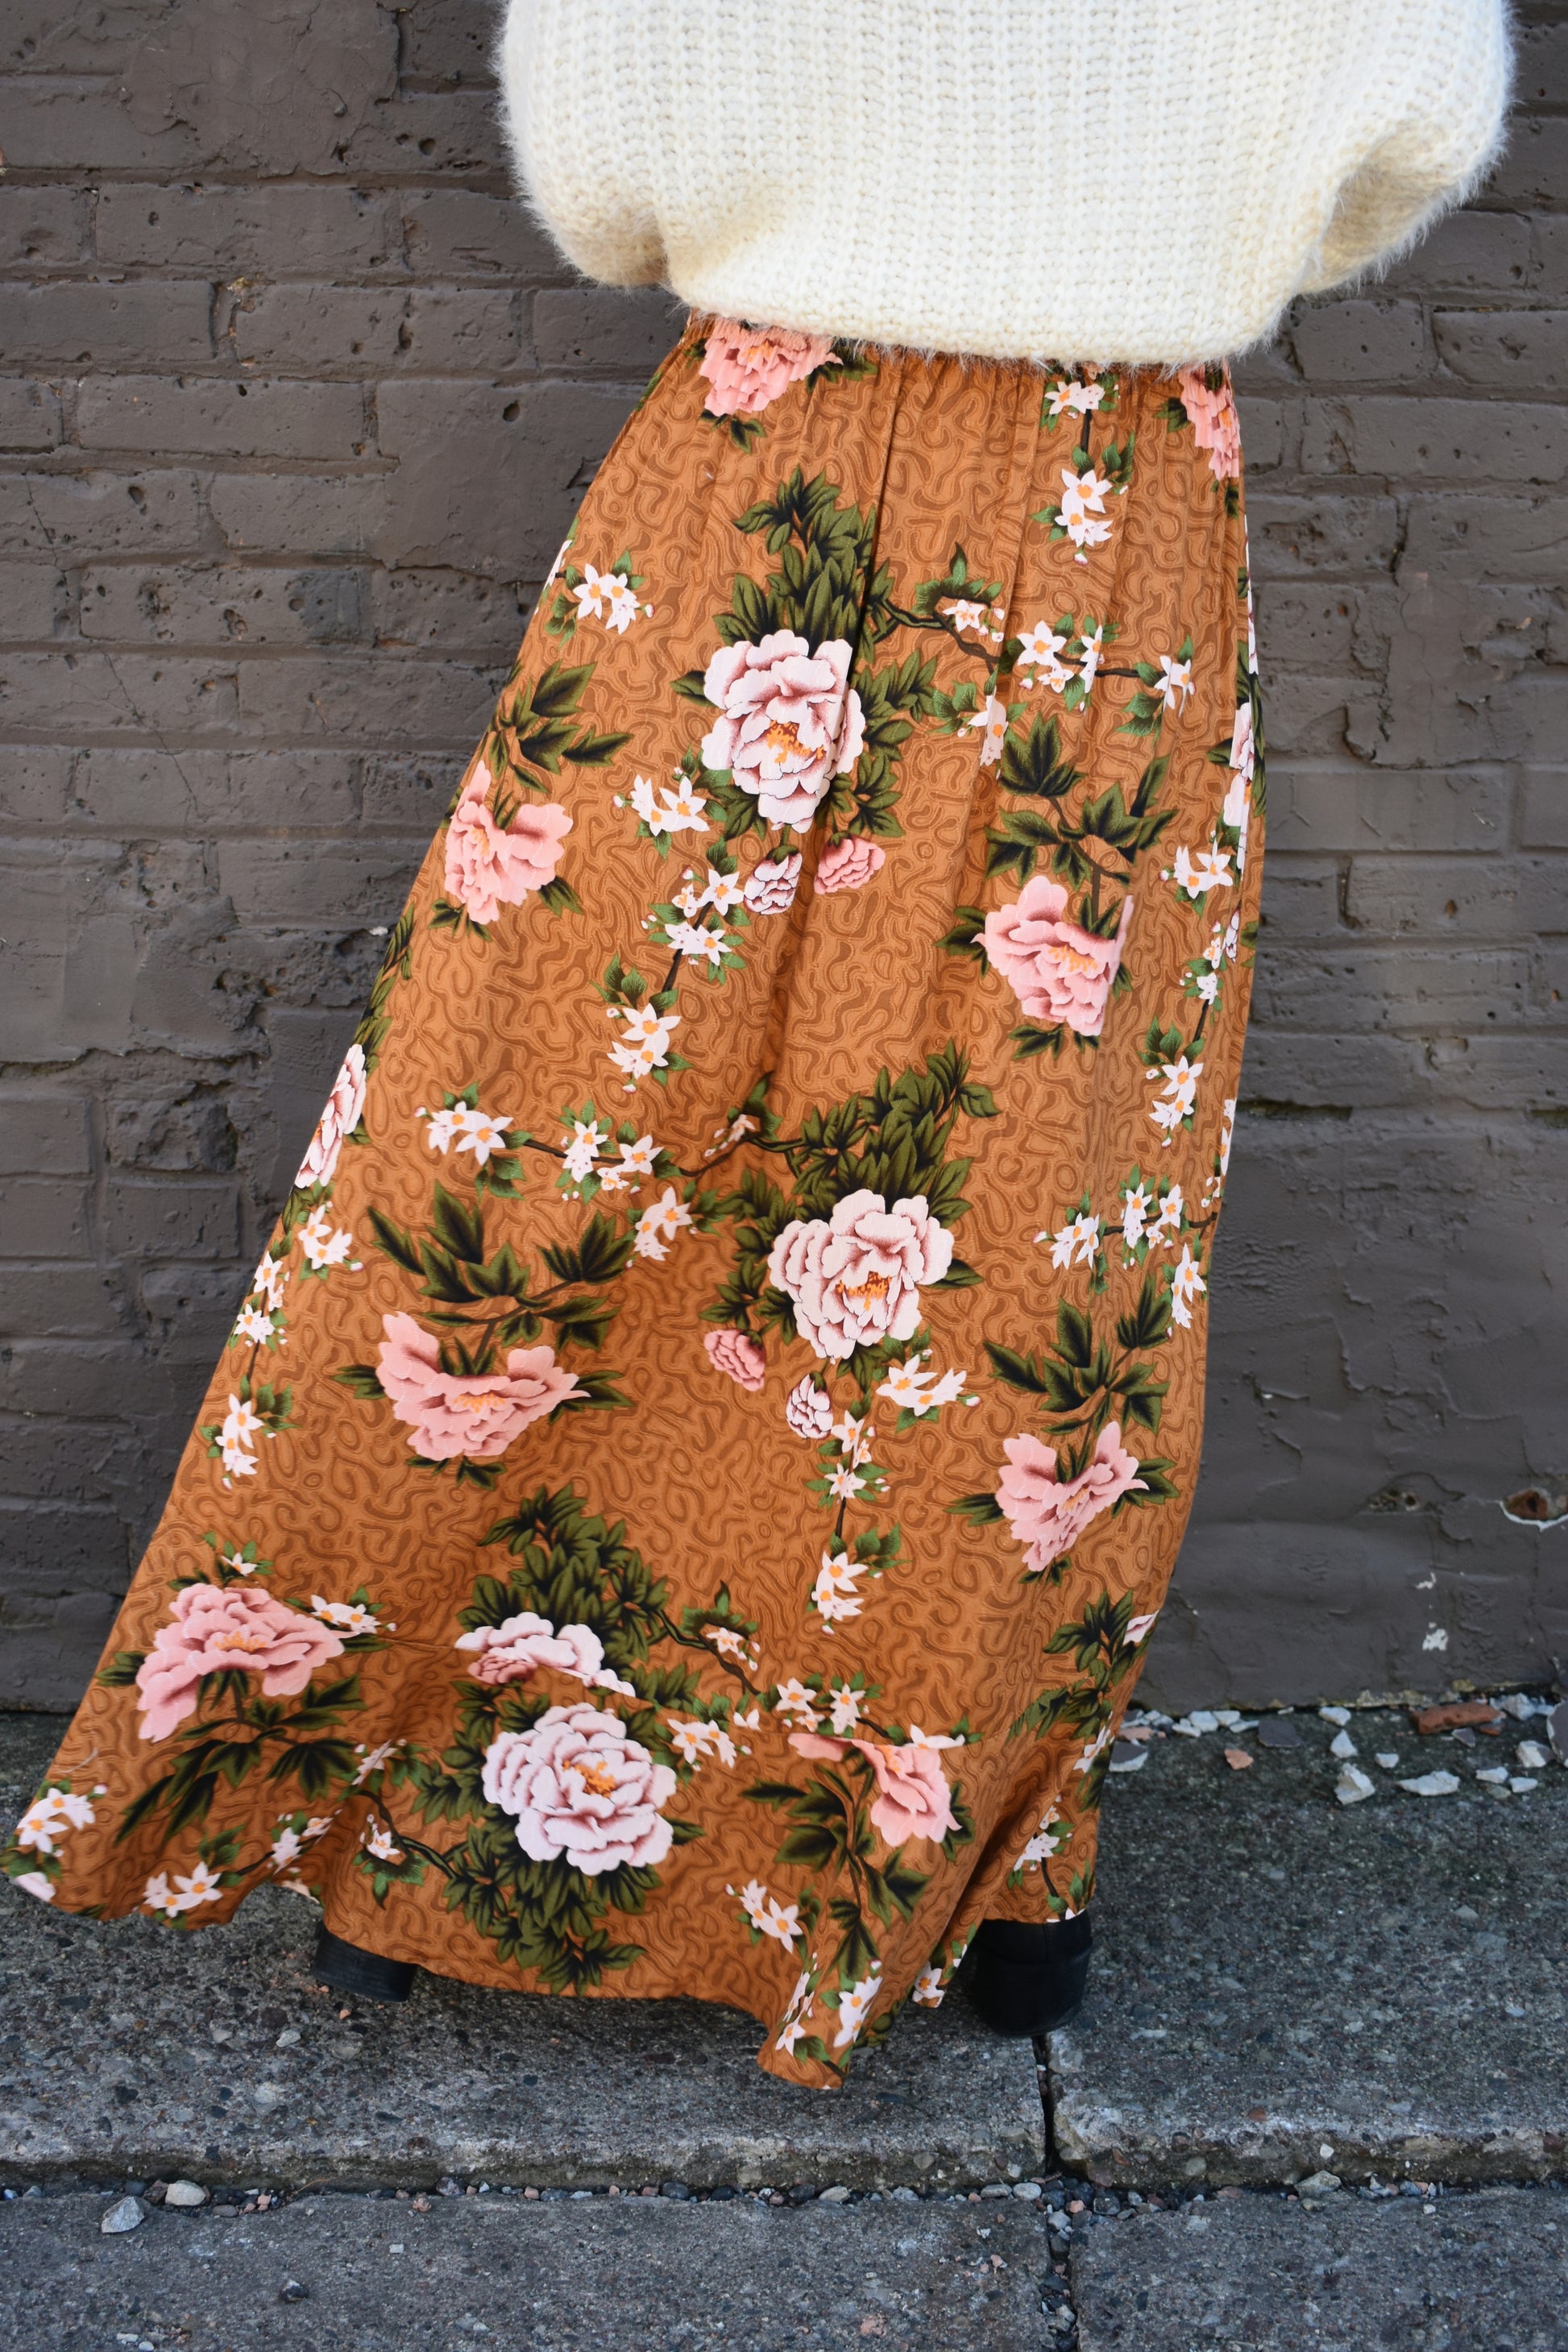 Floral printed maxi skirt with a 3/4 button down front that leads into a center slit. slight ruffle at the bottom. elastic waistband. light brown/rust color background with big printed white and blush colored flowers with green stems.